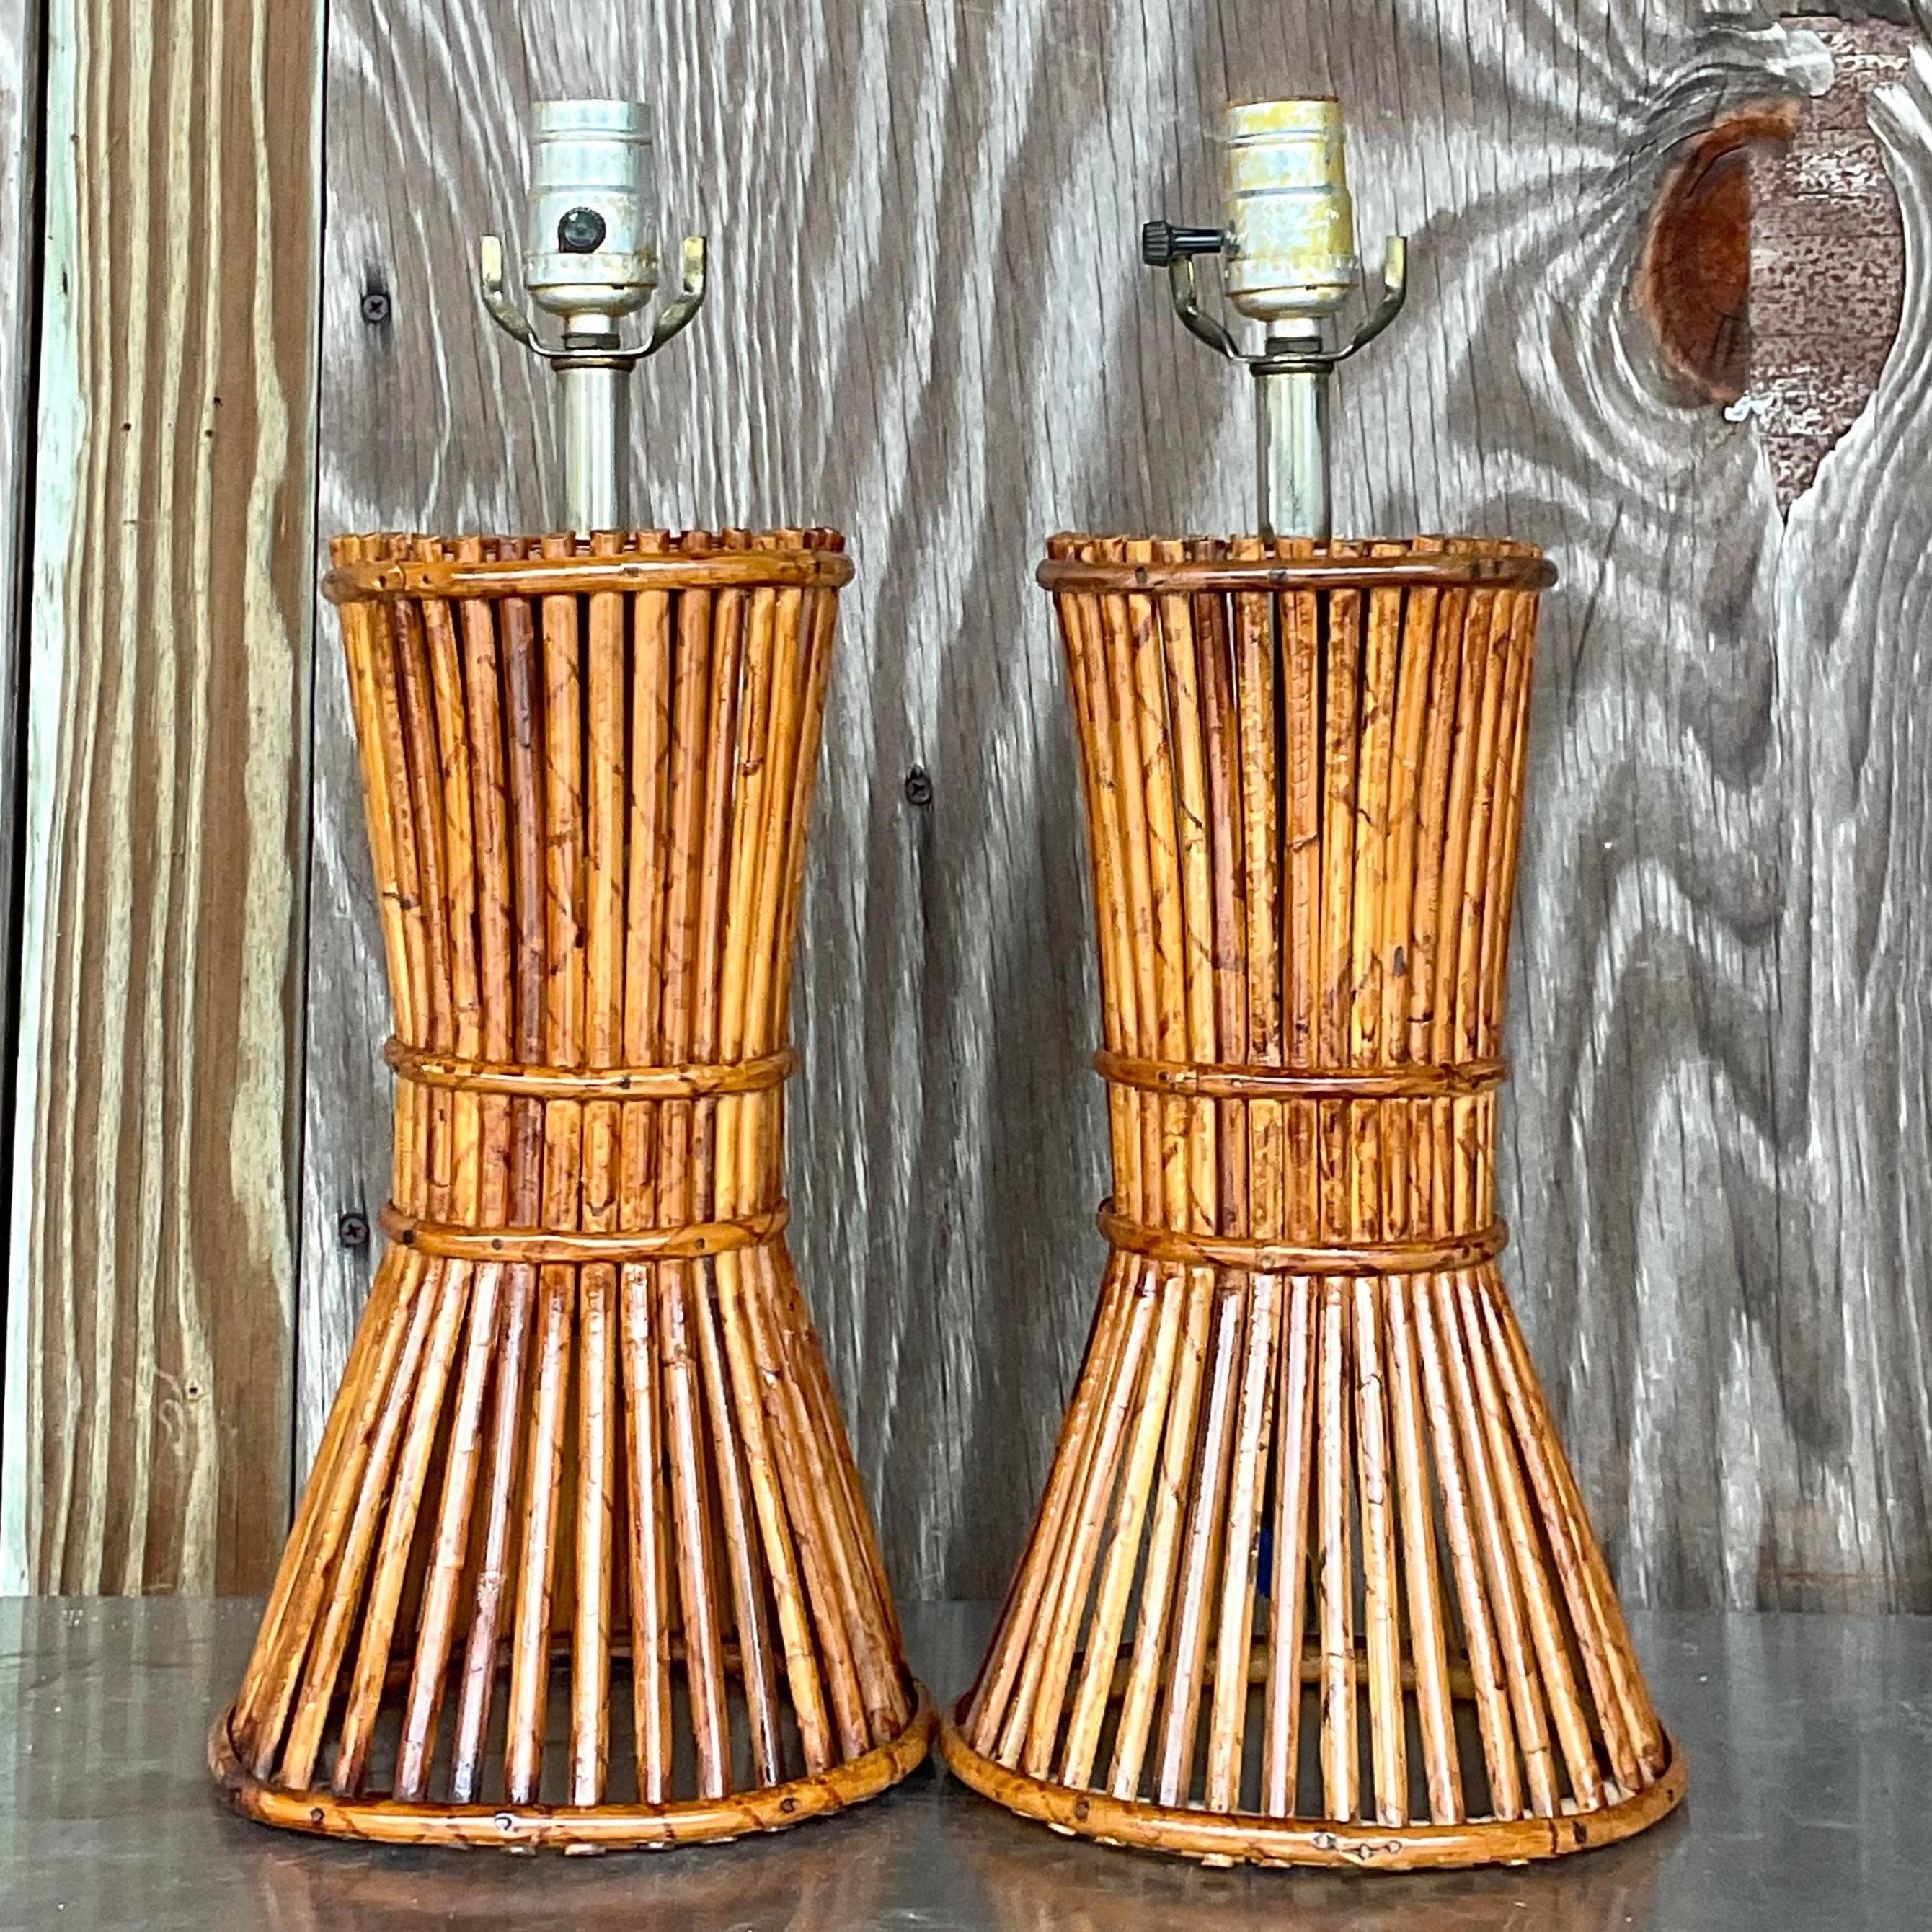 A fabulous pair of vintage Coastal table lamps. A chic pencil reed cylinder that is gathered in the middle. Woven rattan tops. Acquired from a Palm Beach estate.